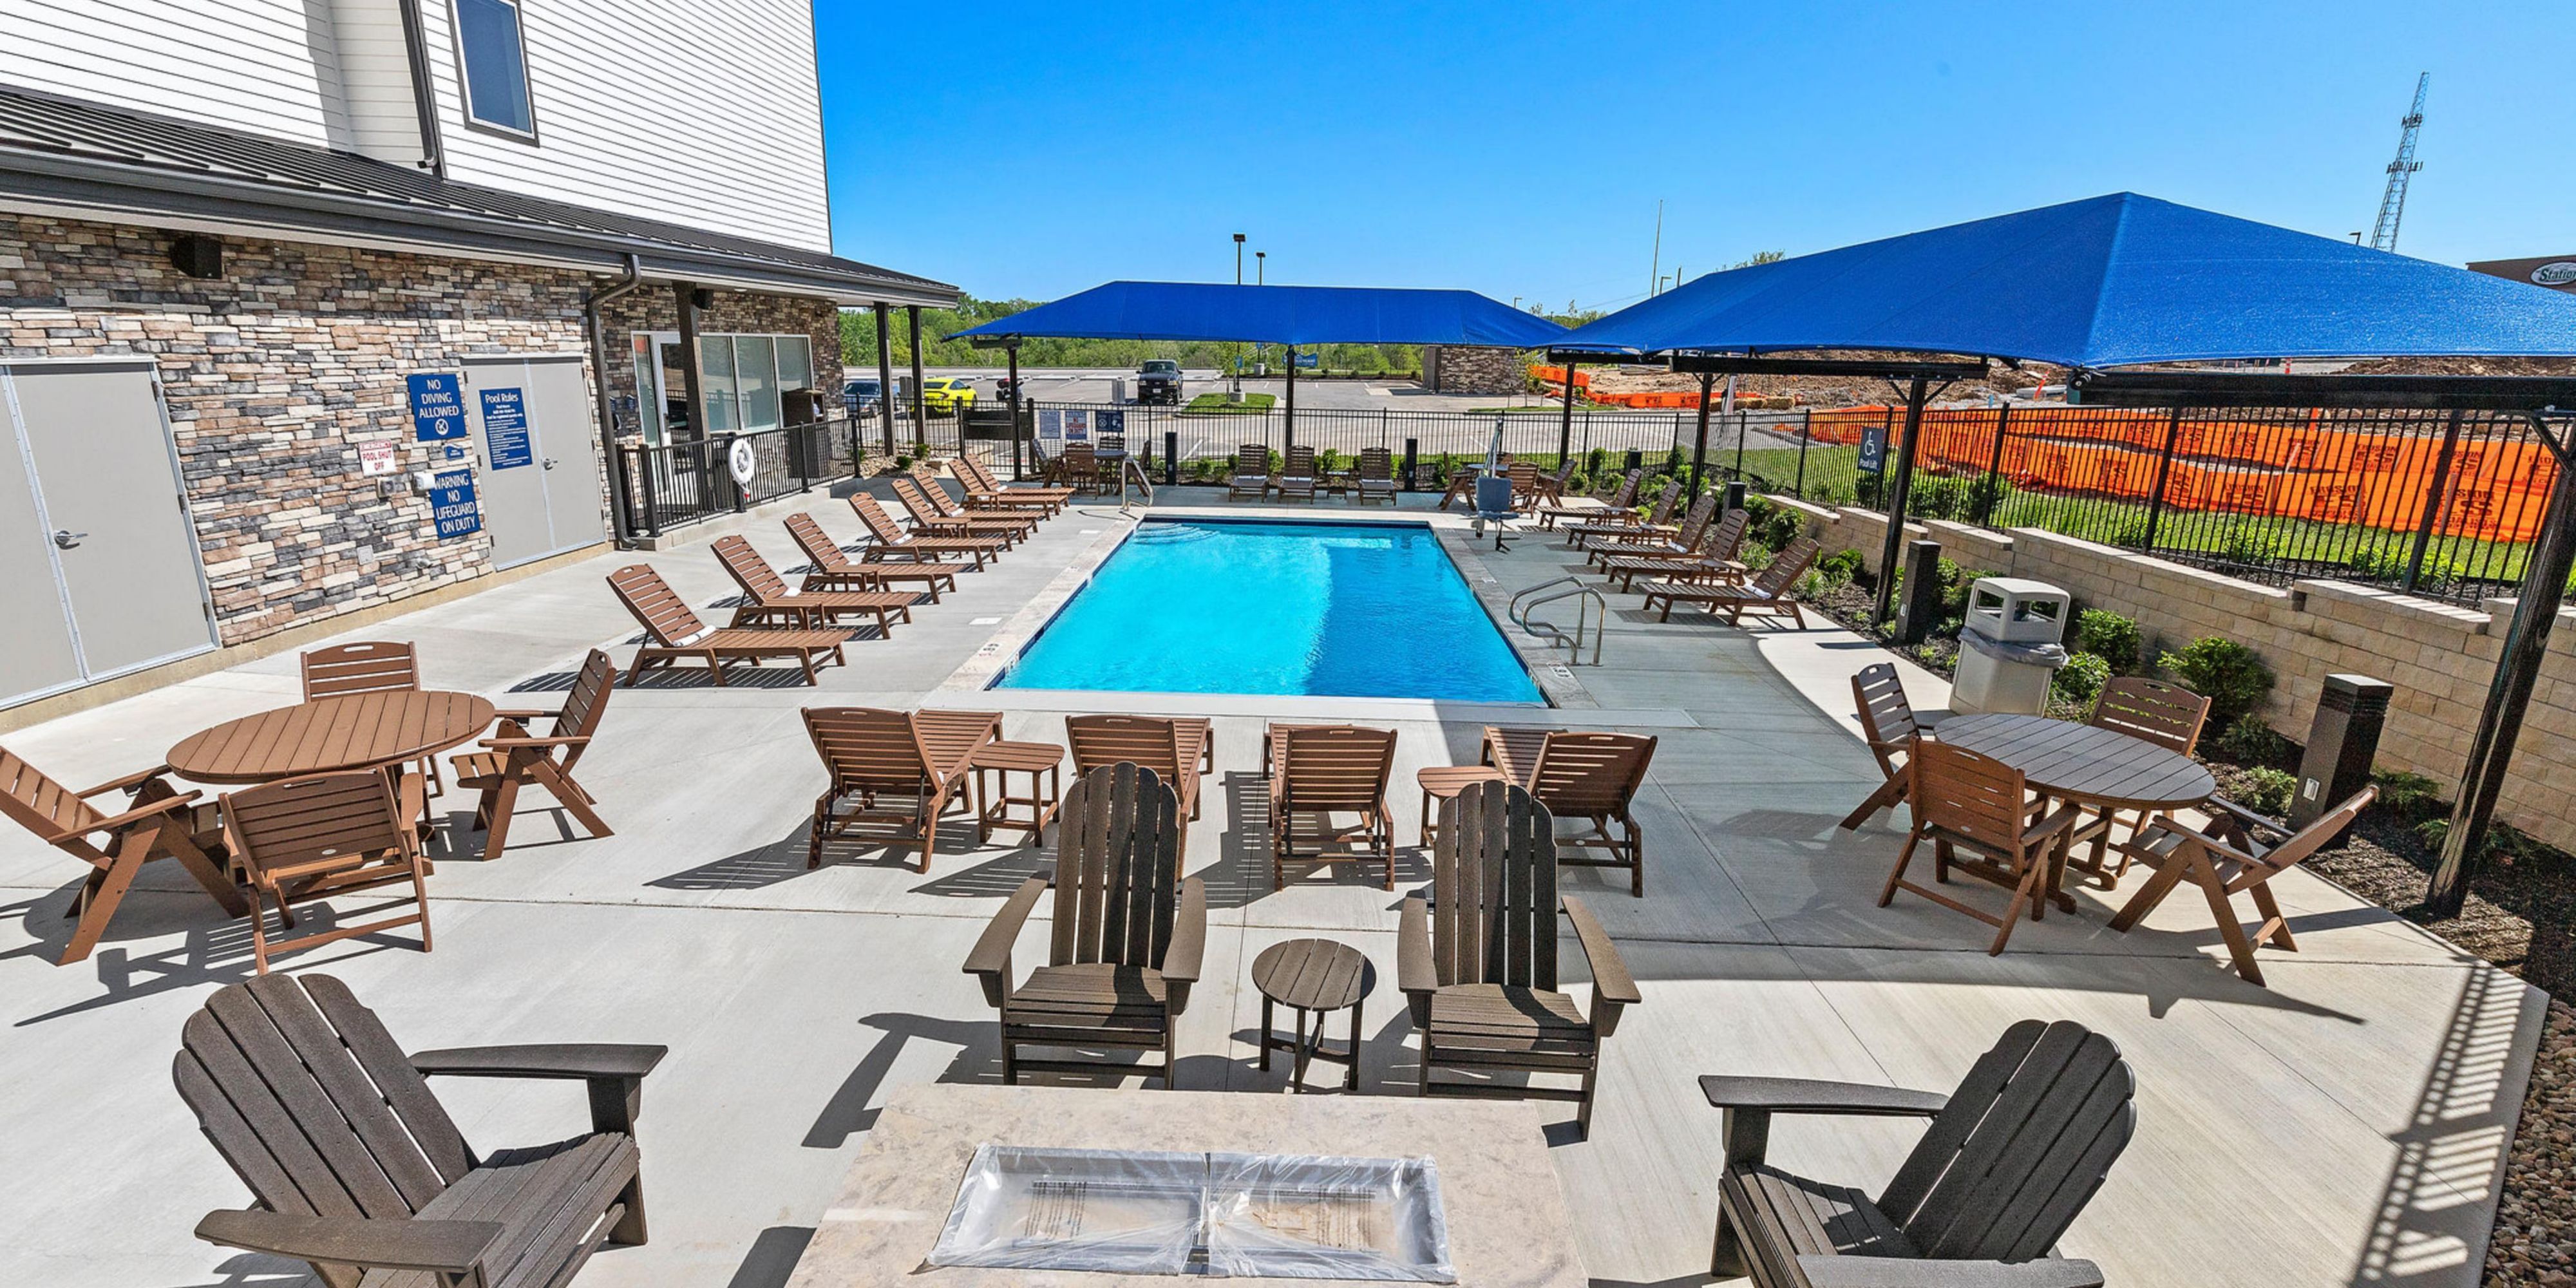 Enjoy our spacious terrace with multiple seating areas and the outdoor gated pool.  